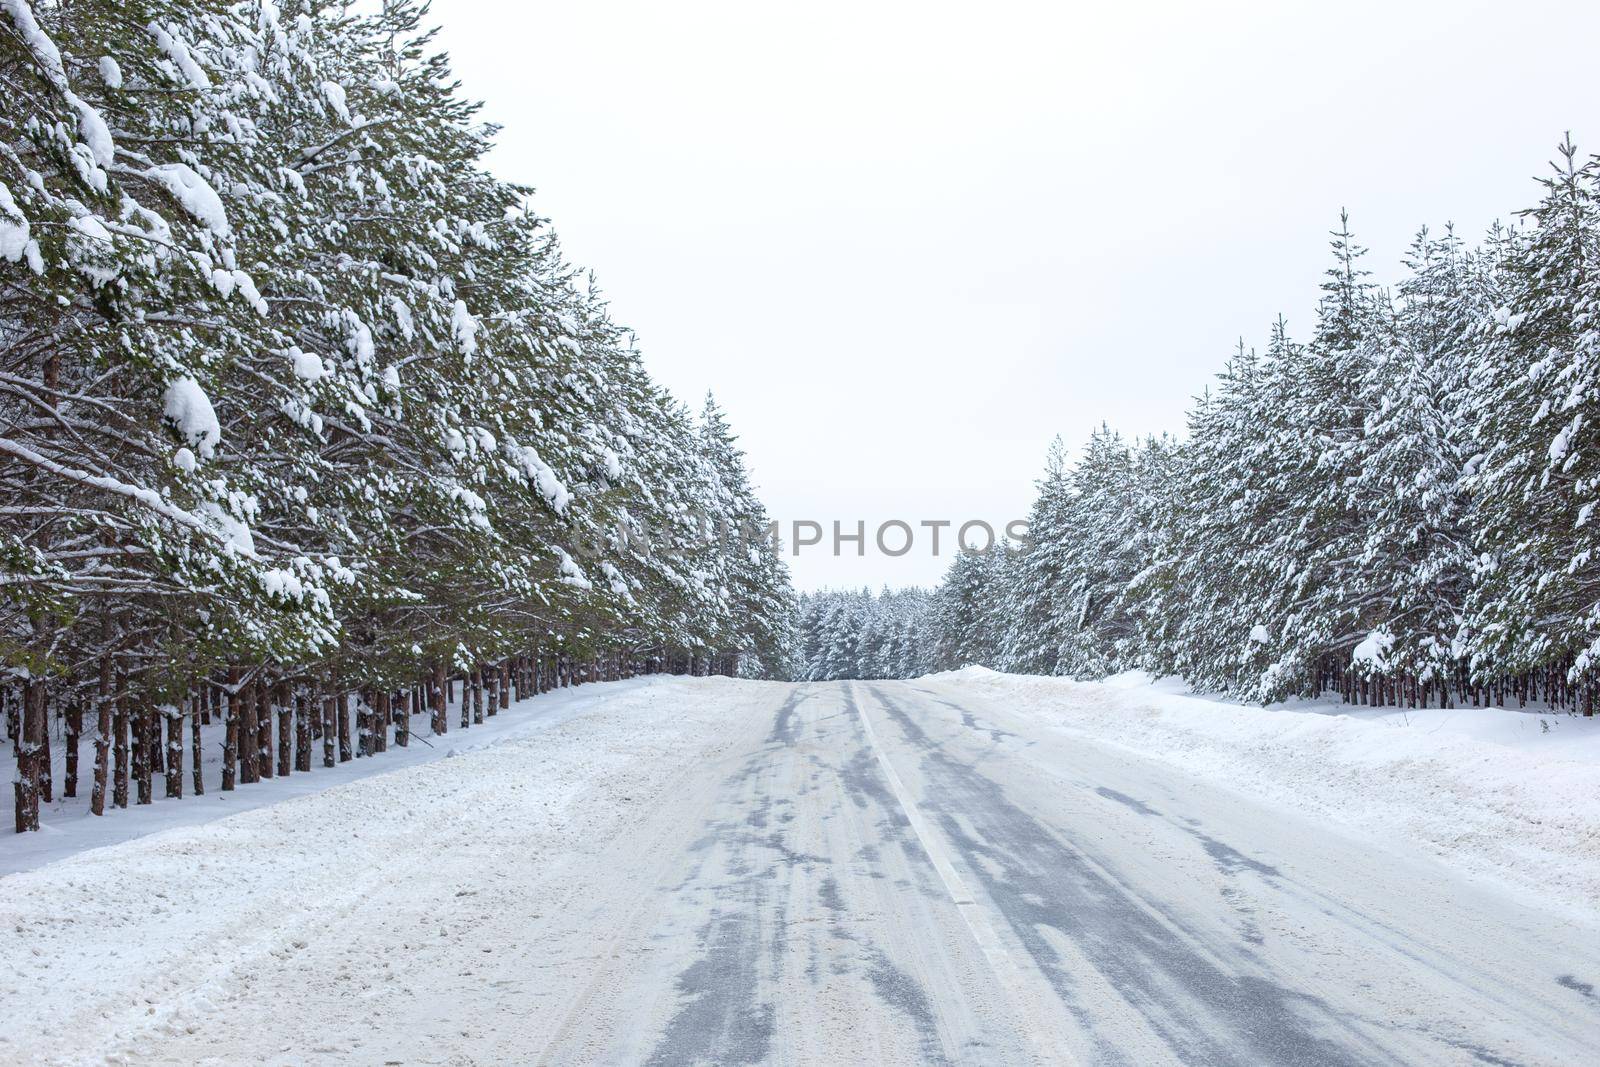 landscape of snowy winter road through a pine forest outside the city. Horizontal